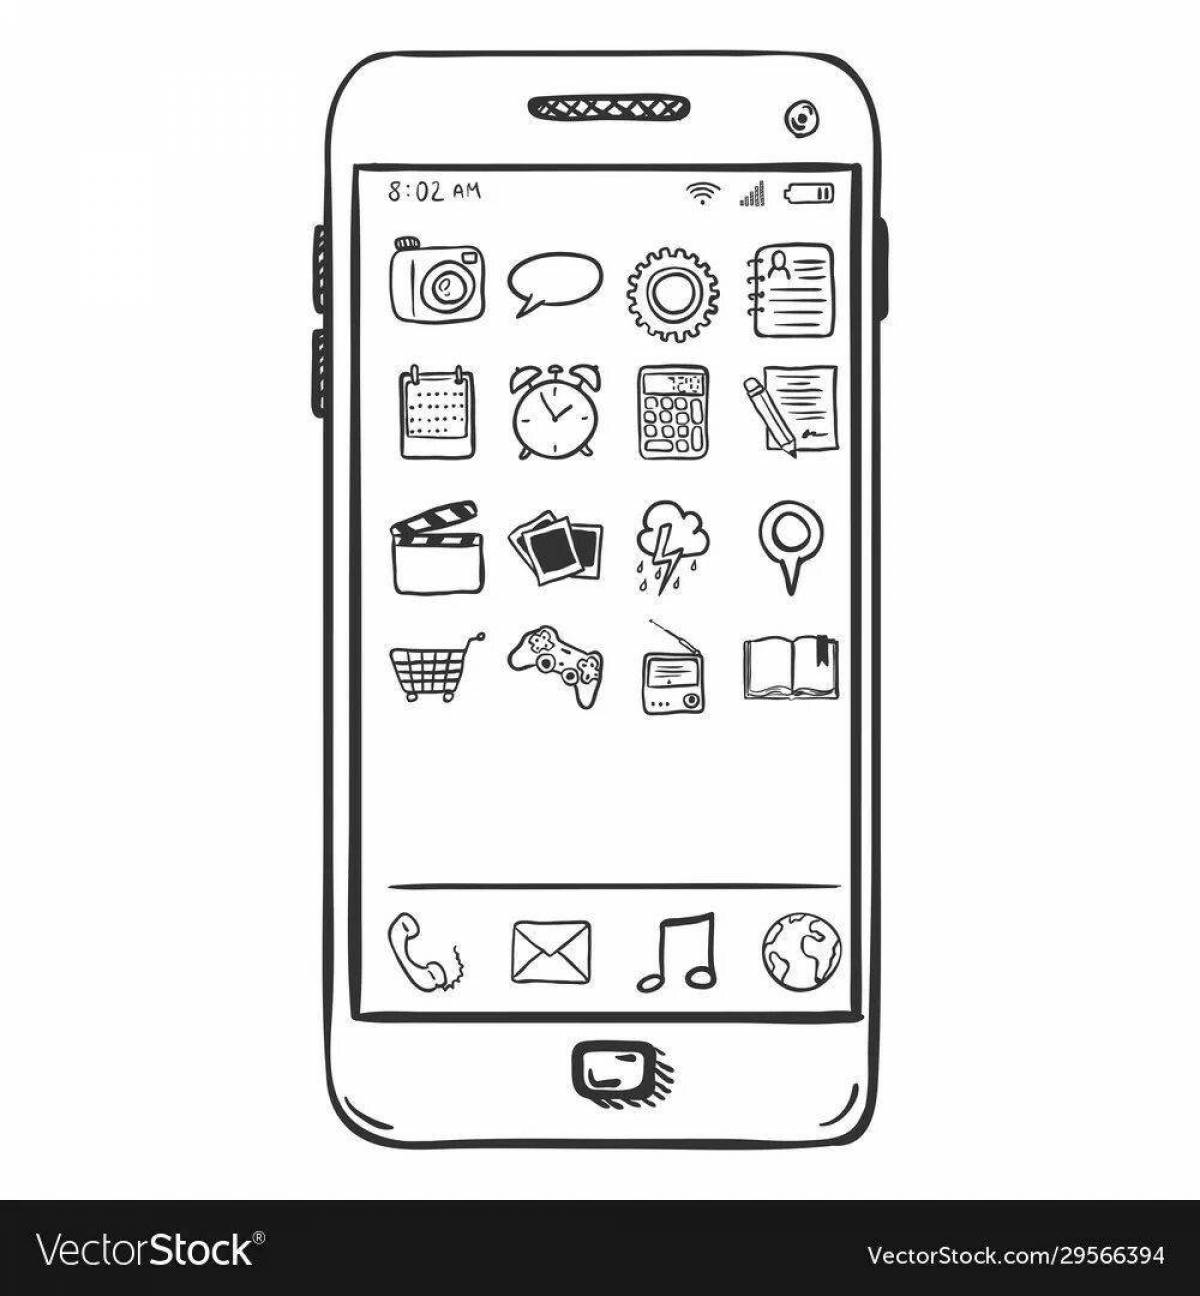 Playful coloring page for phones and tablets